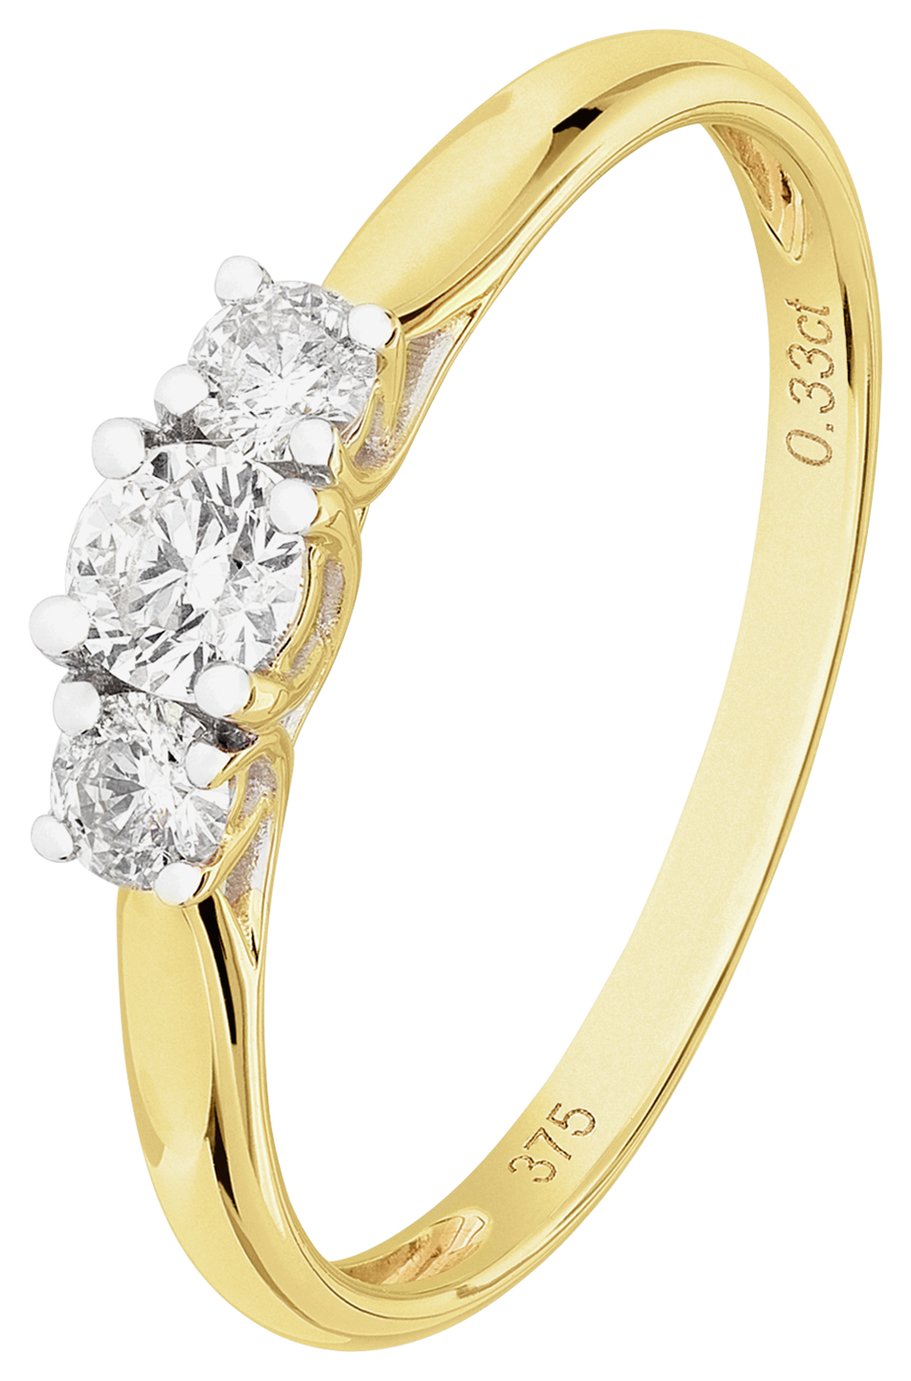 Revere 9ct Gold 0.33ct Diamond Trilogy Engagement Ring - N